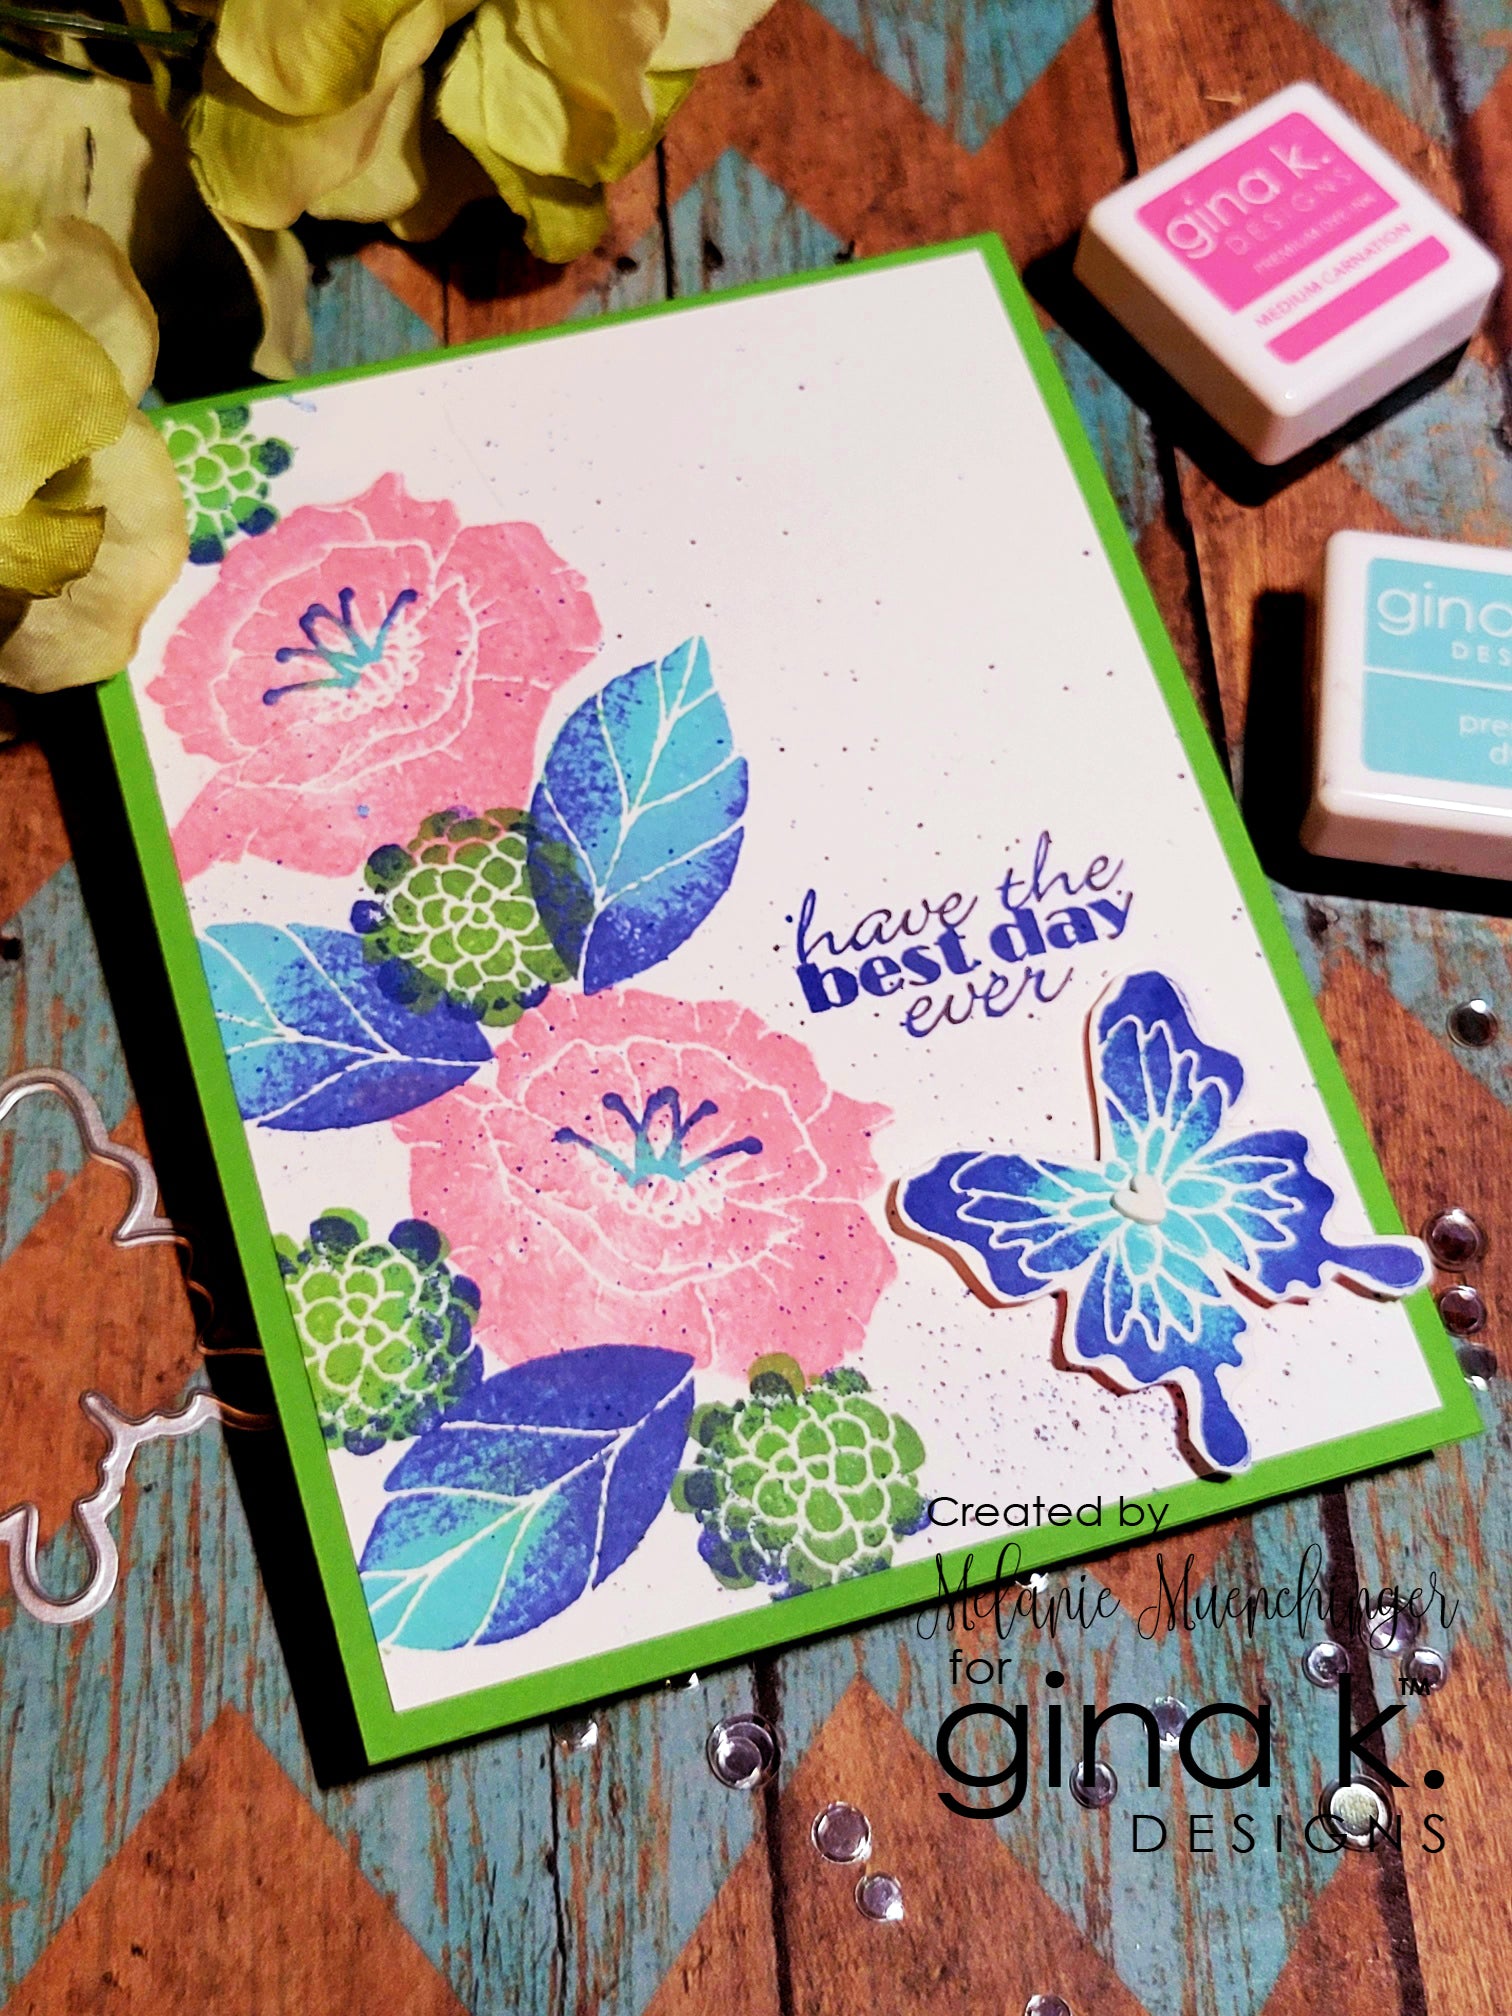 STAMPS- Bold Flowers